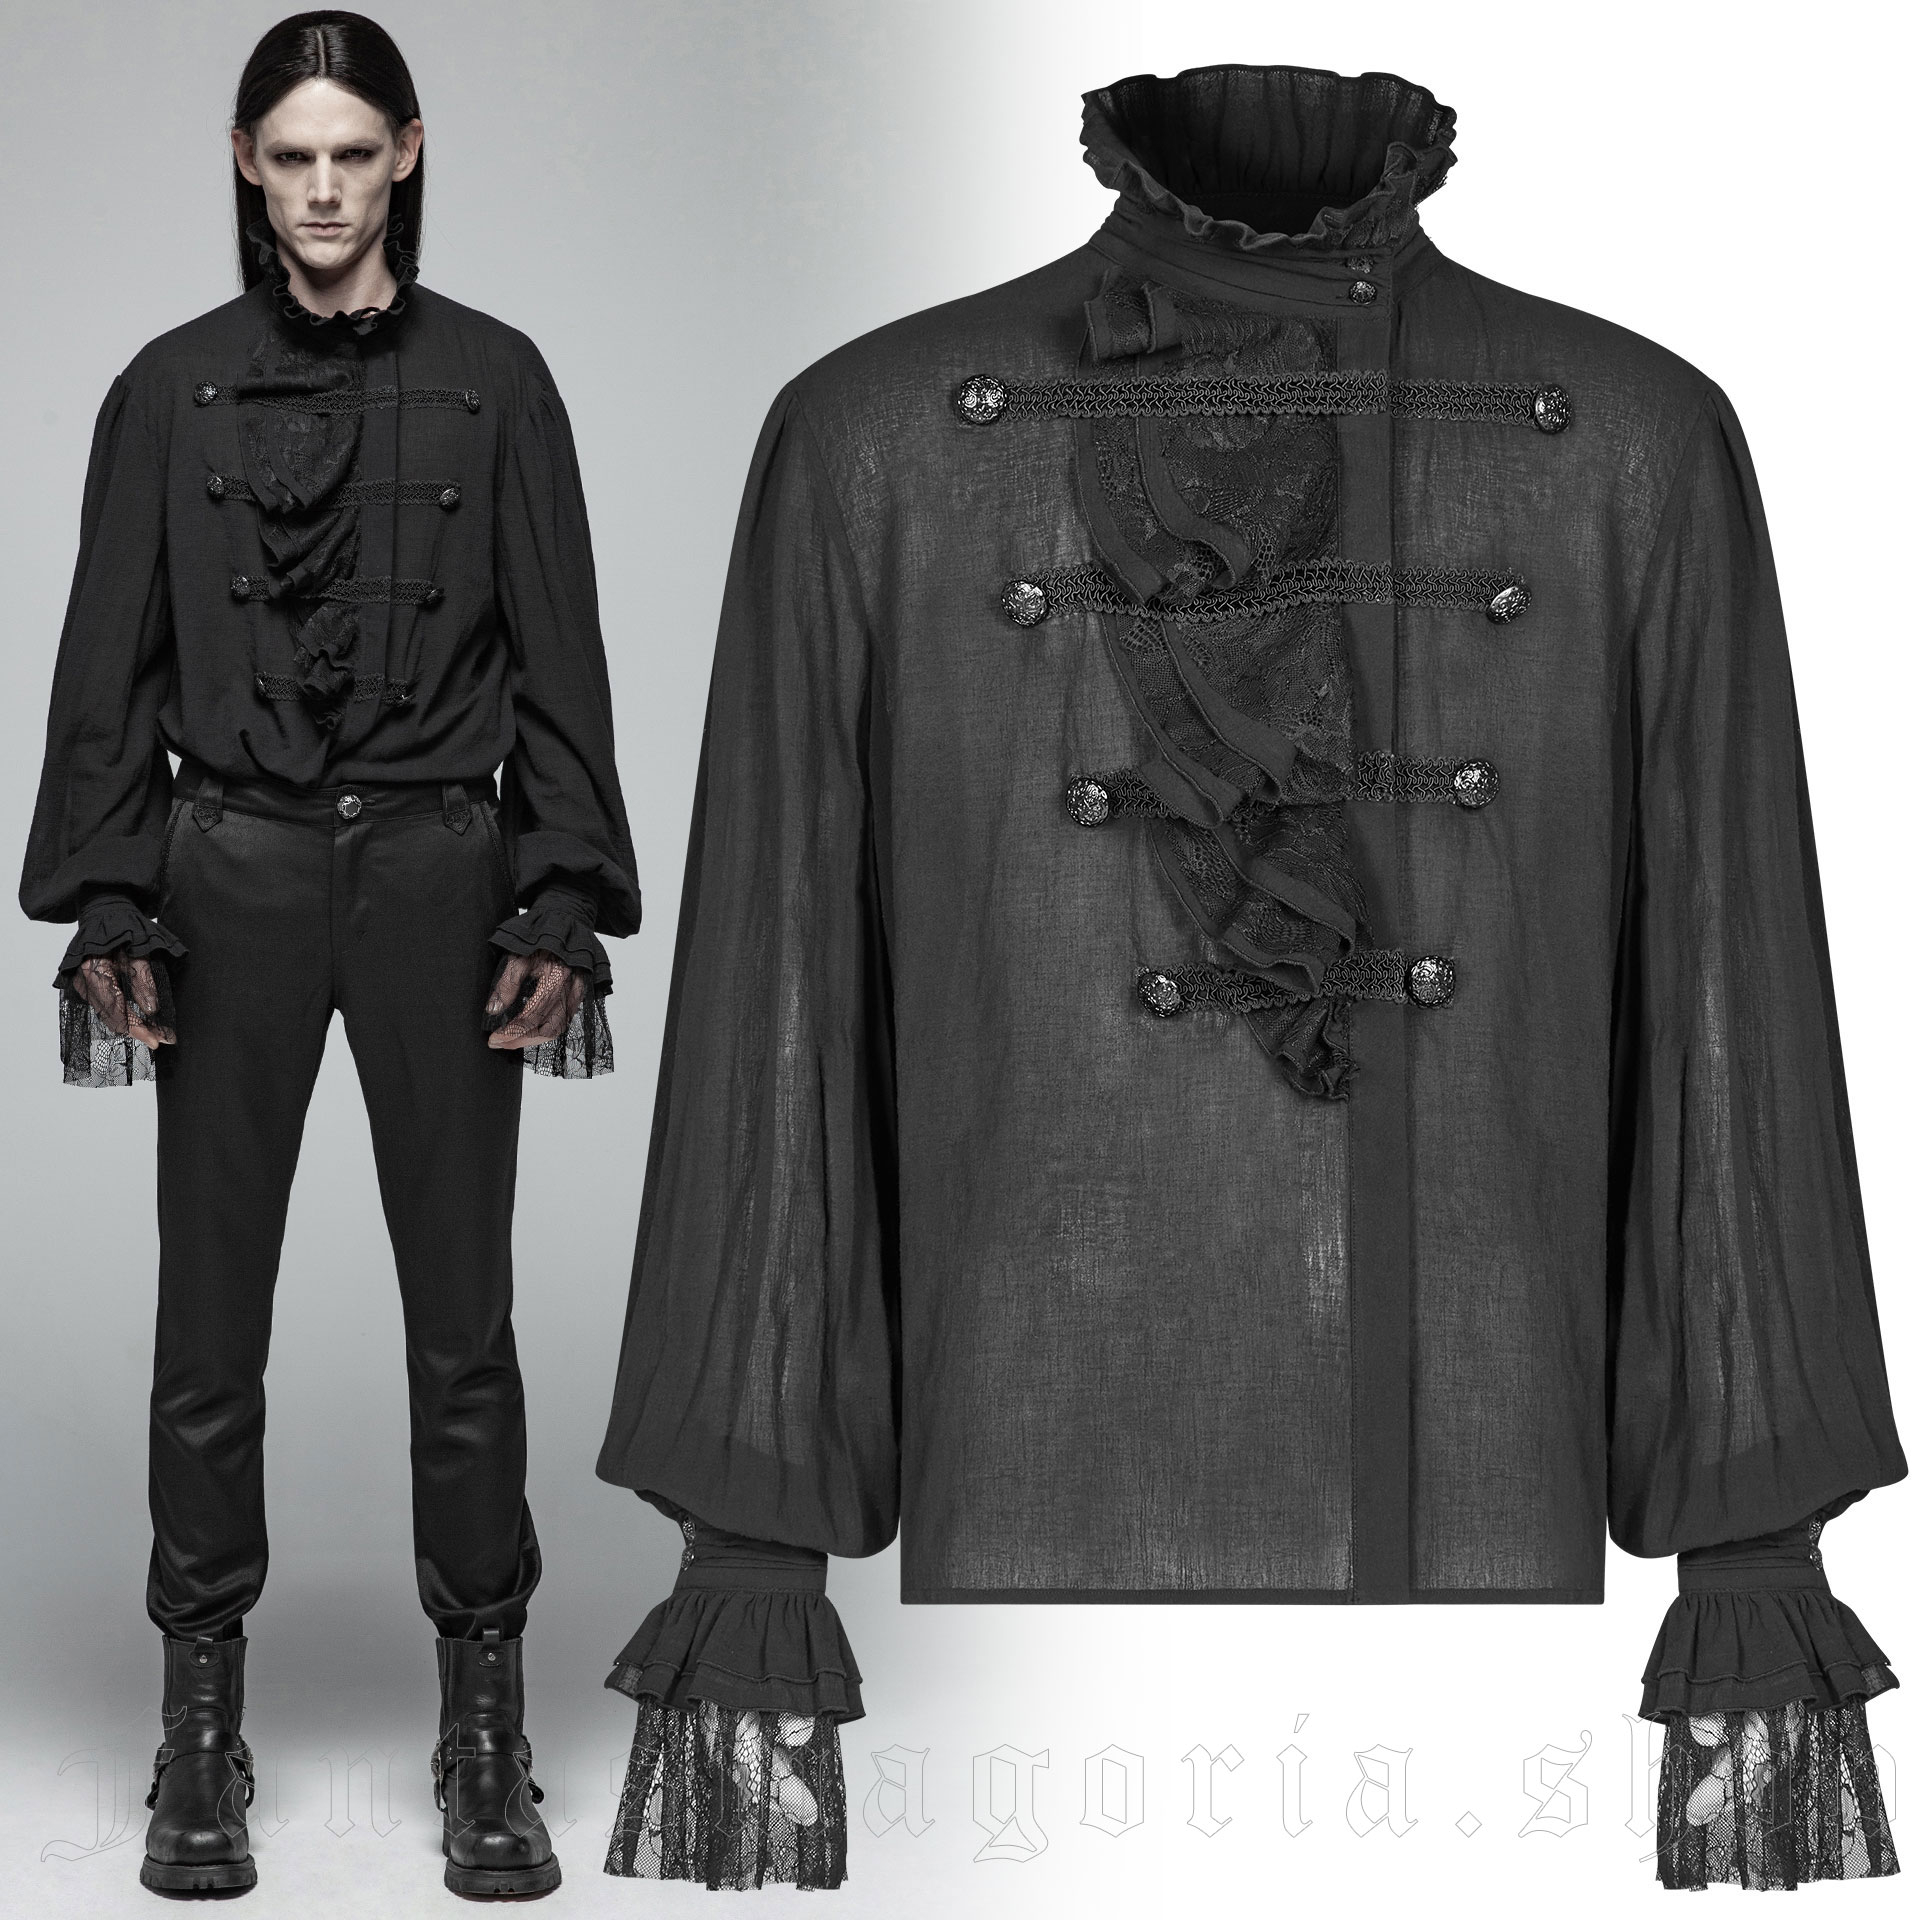 Long-sleeved shirt with jabot style collar by Punk Rave.. Punk